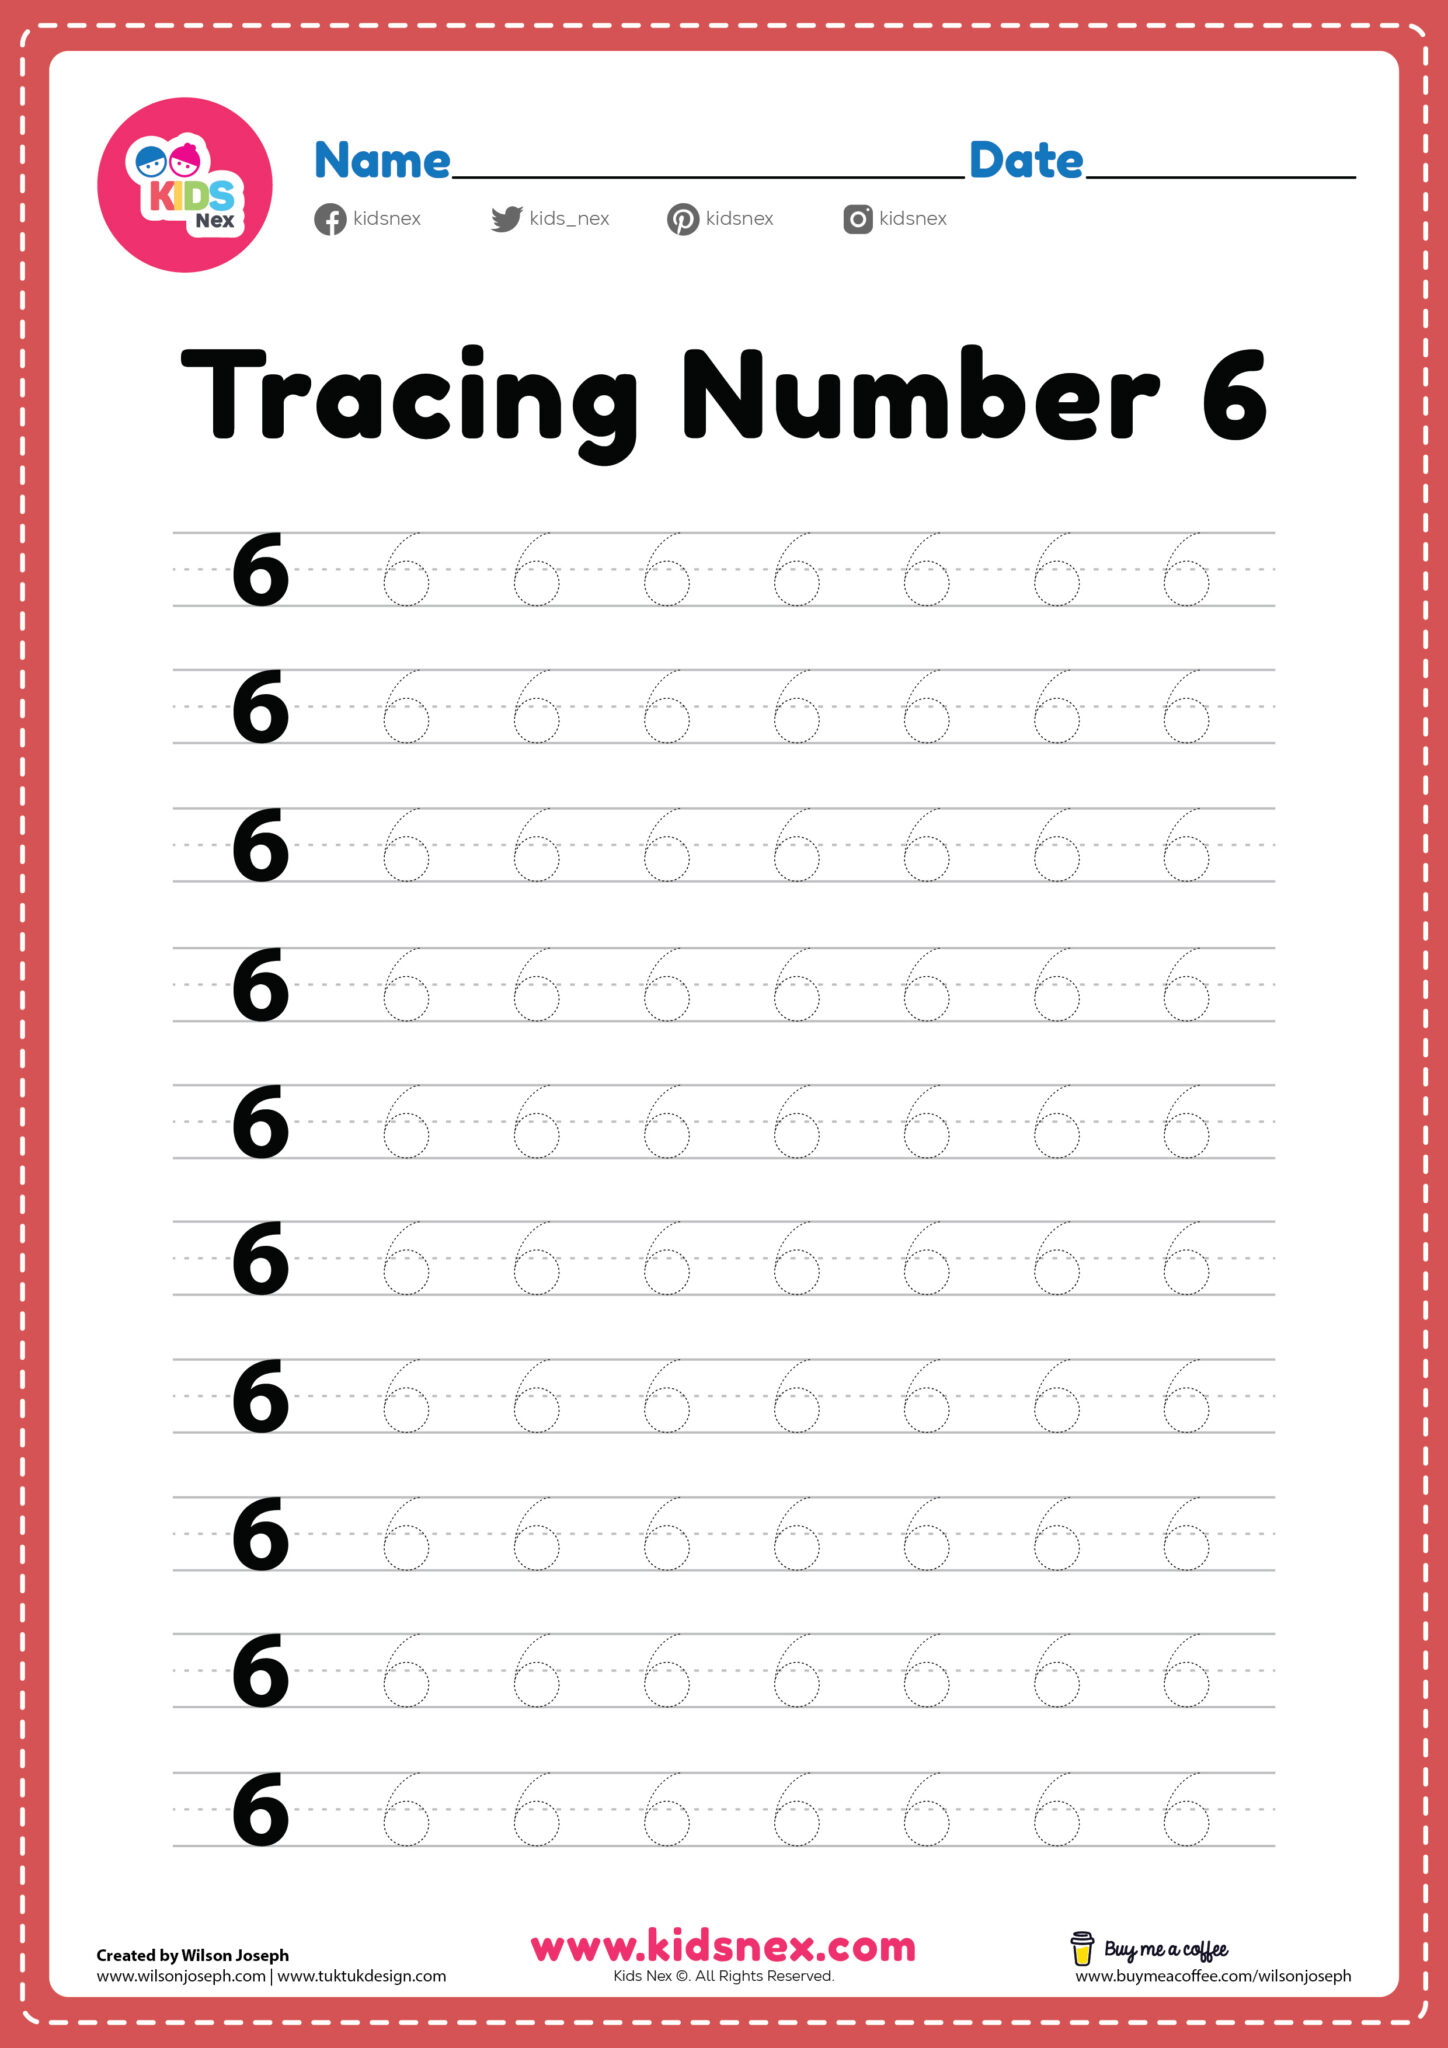 practice-writing-the-number-6-worksheet-twisty-noodle